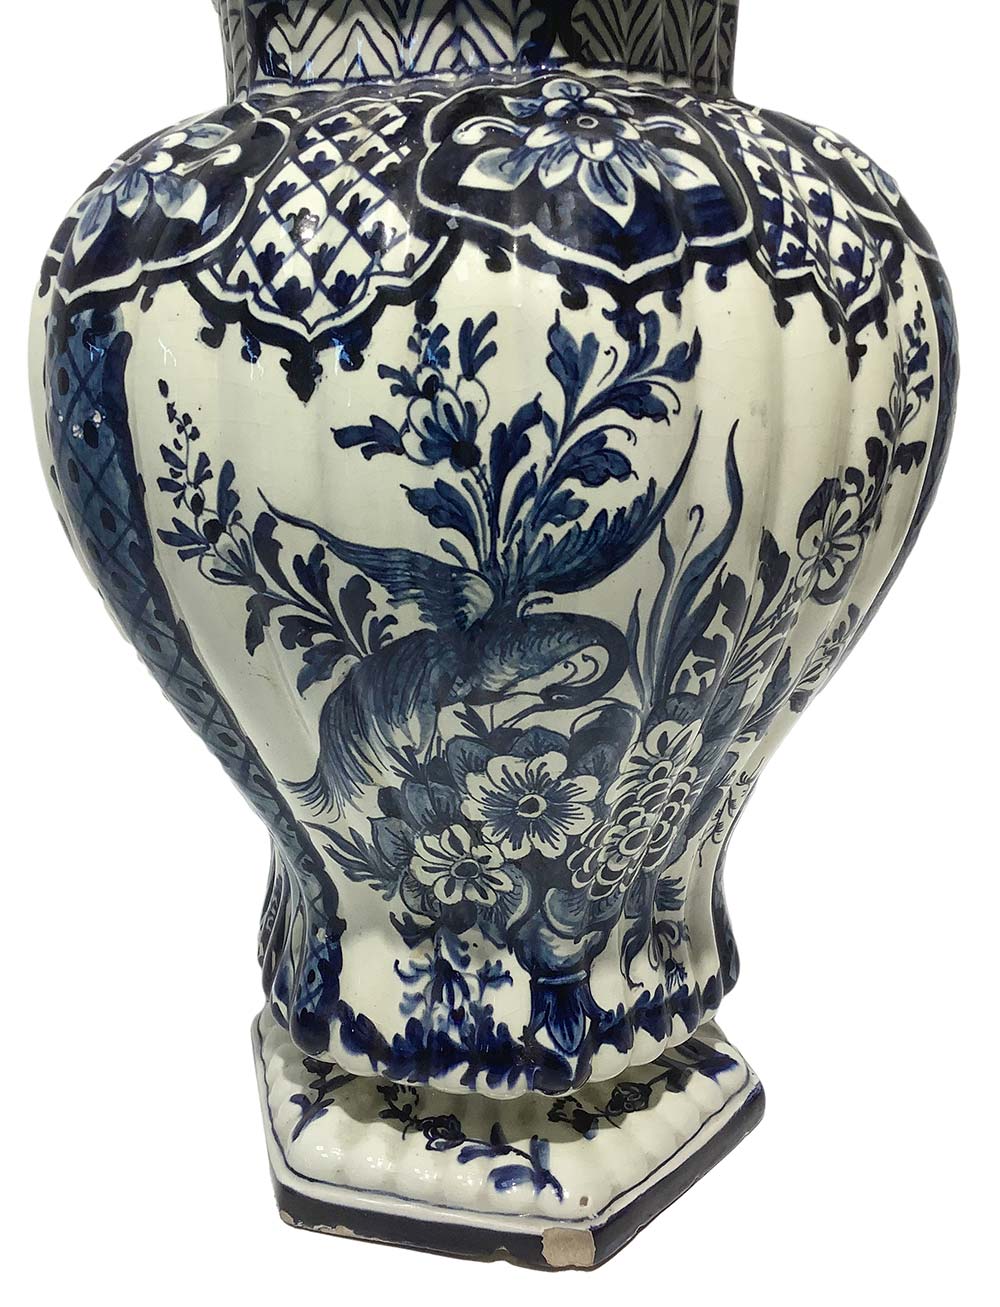 White majolica potiche with blue decorations, Delft. Dated and signed at the base Corint 1799. - Image 3 of 4